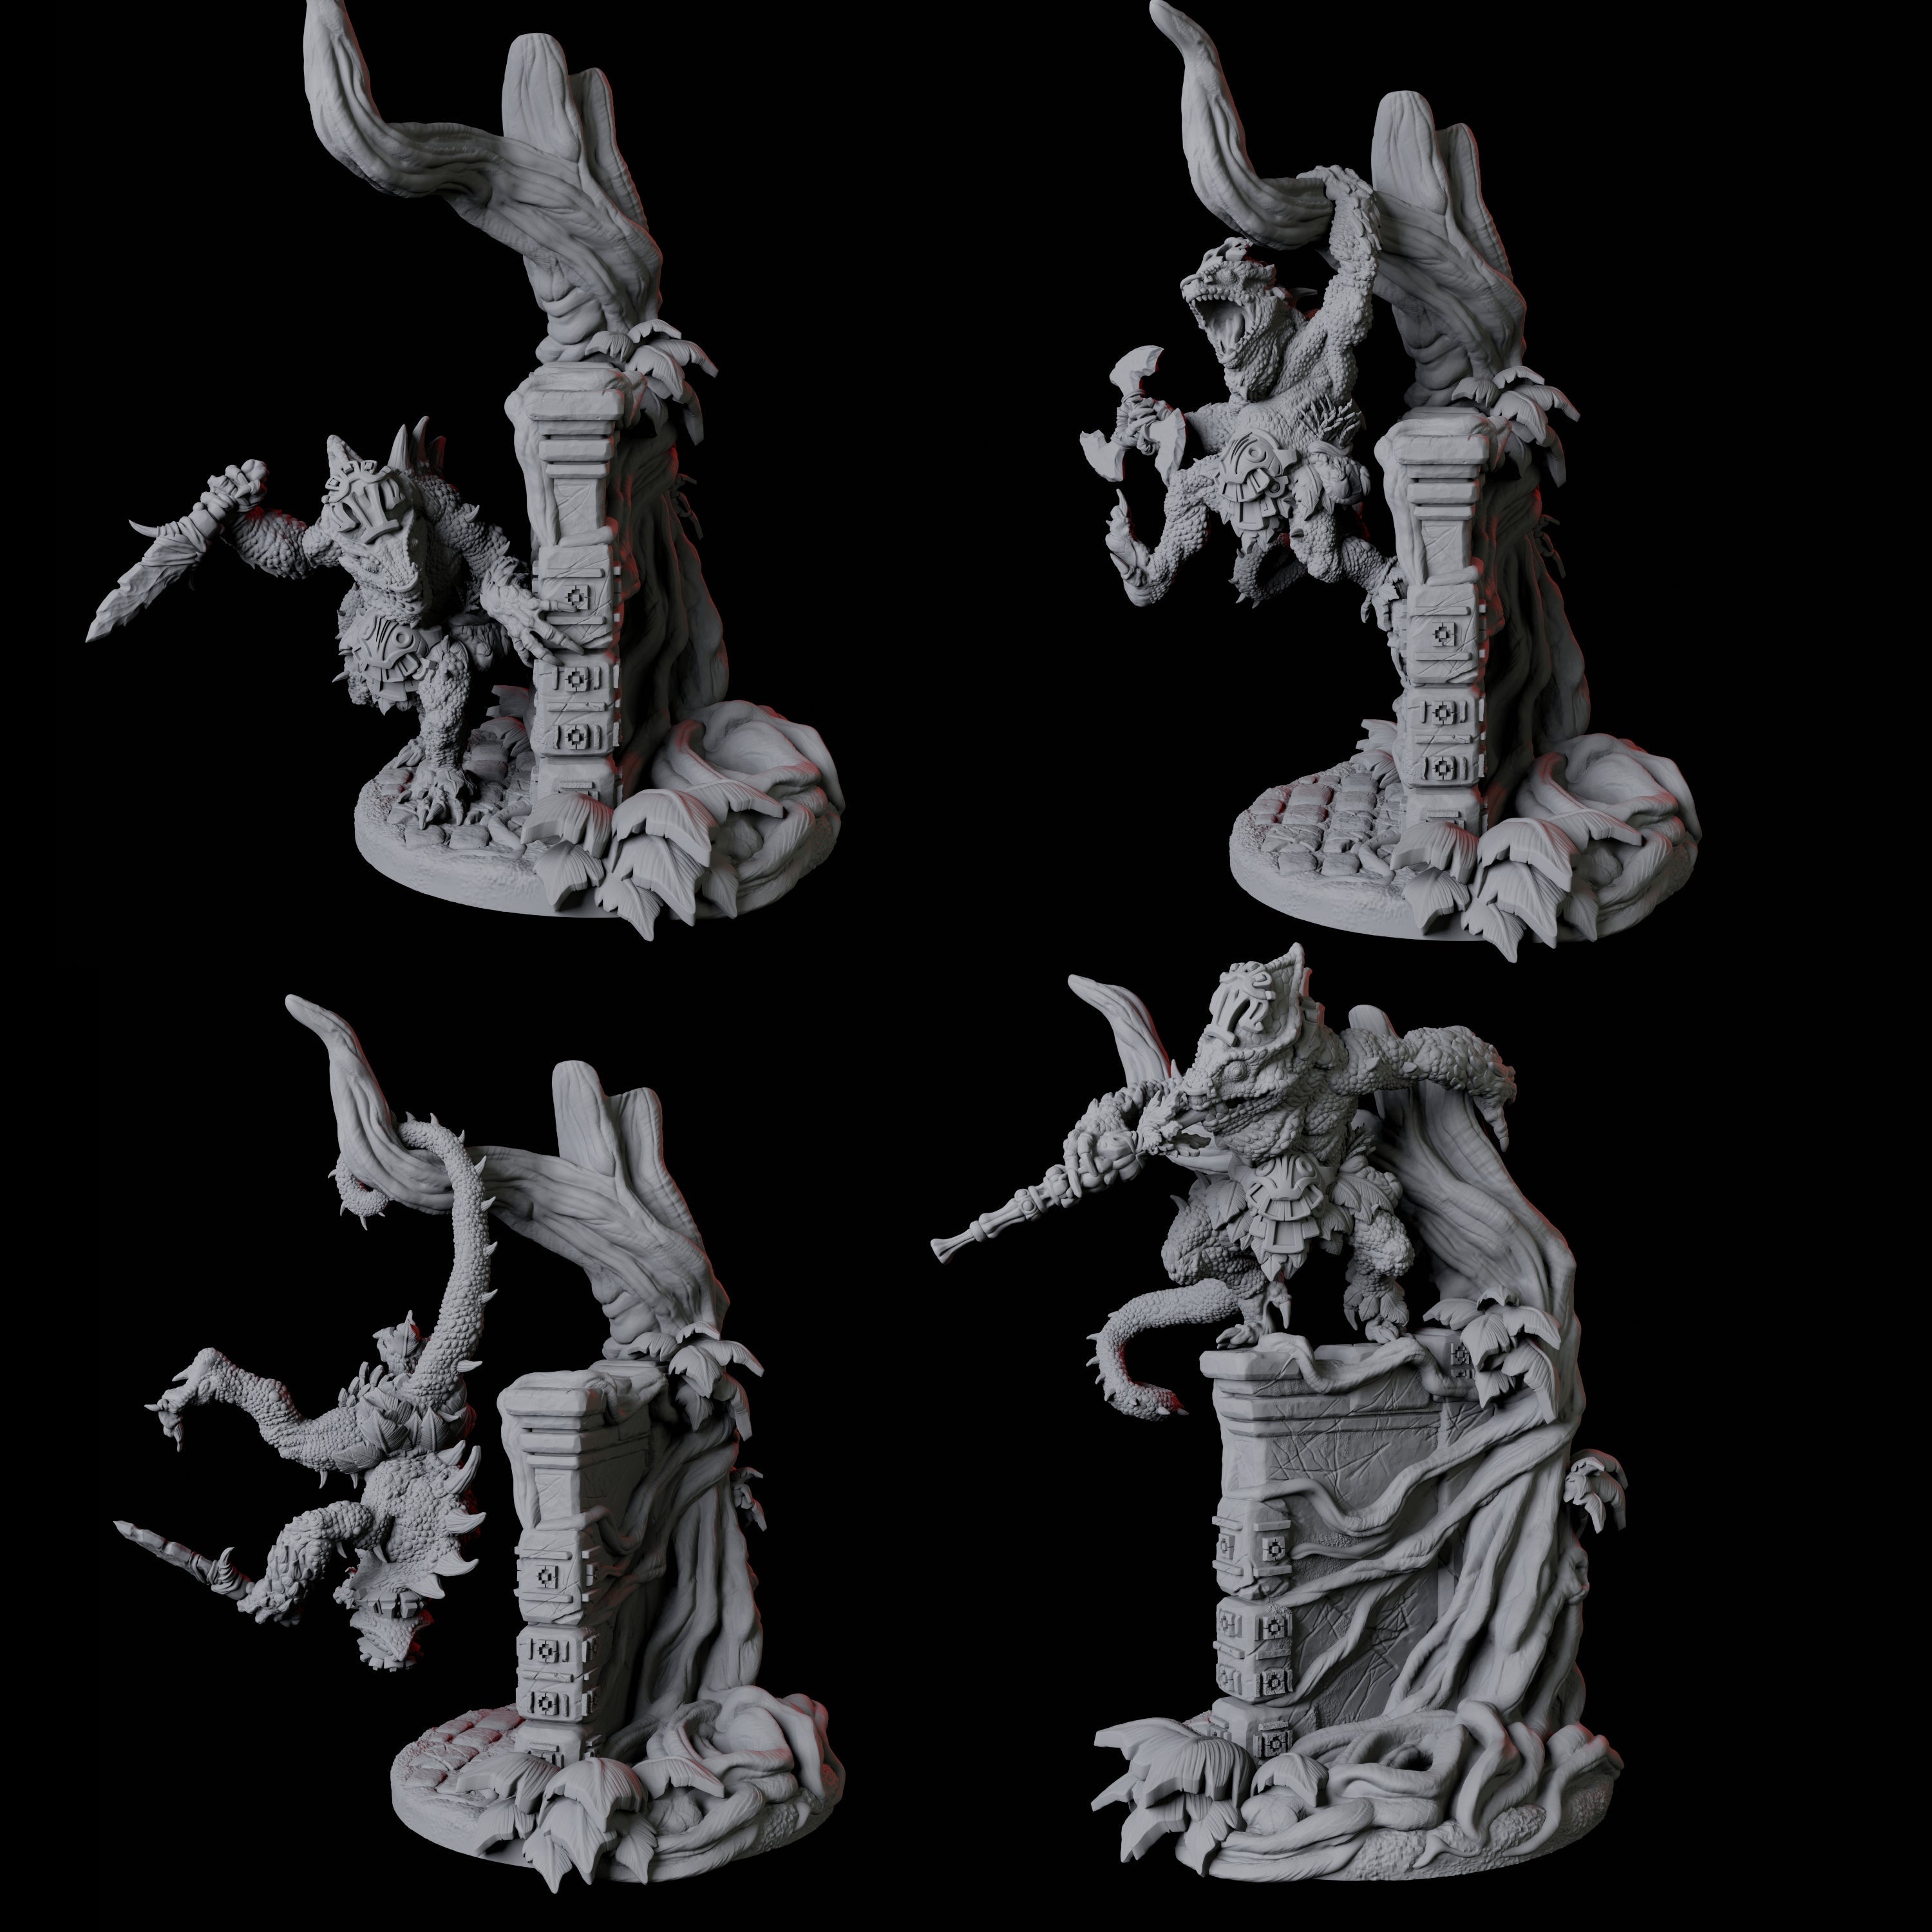 Four Grung Rogues Miniature for Dungeons and Dragons, Pathfinder or other TTRPGs